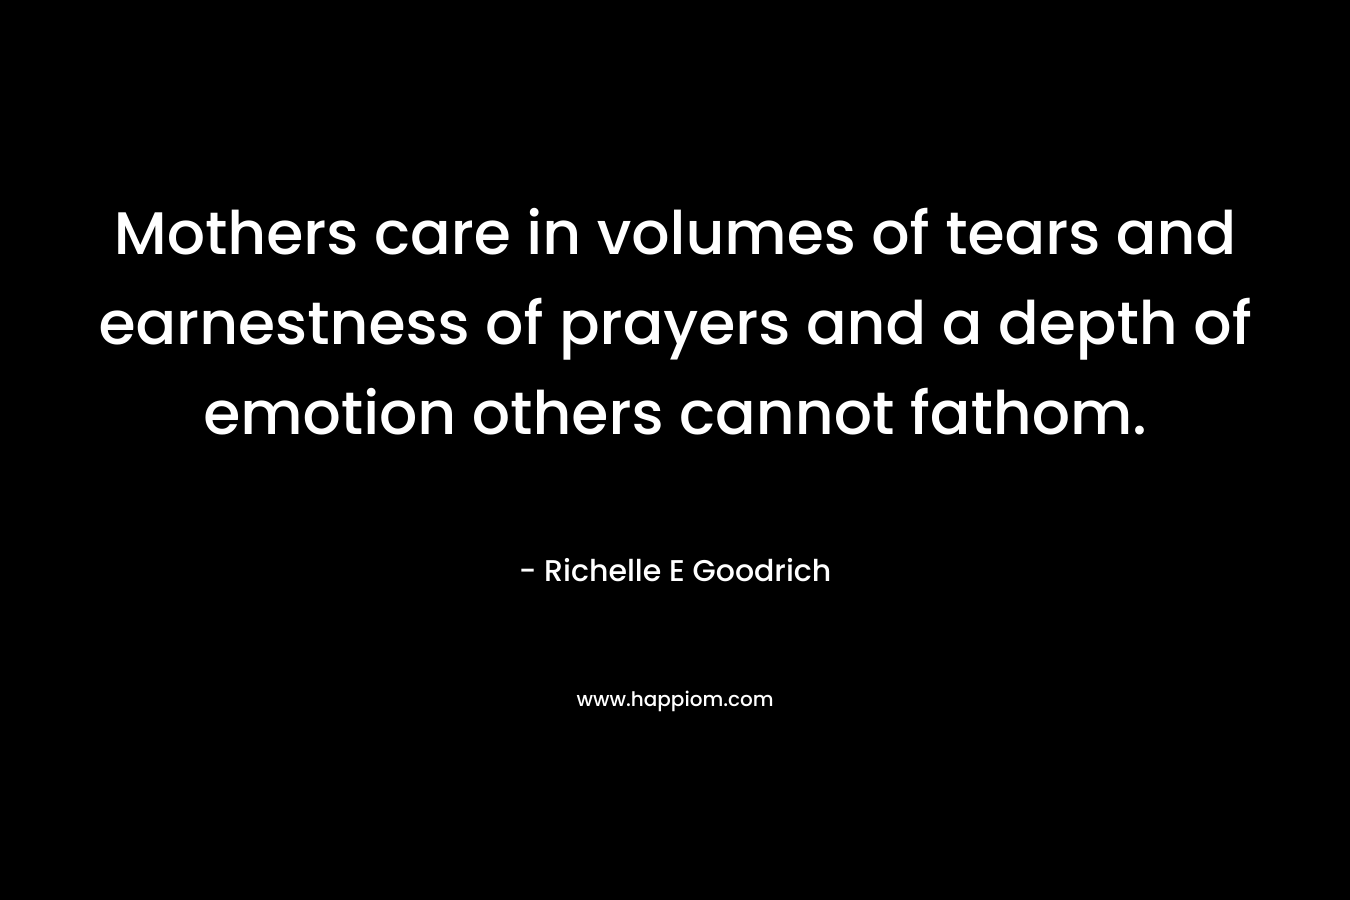 Mothers care in volumes of tears and earnestness of prayers and a depth of emotion others cannot fathom.